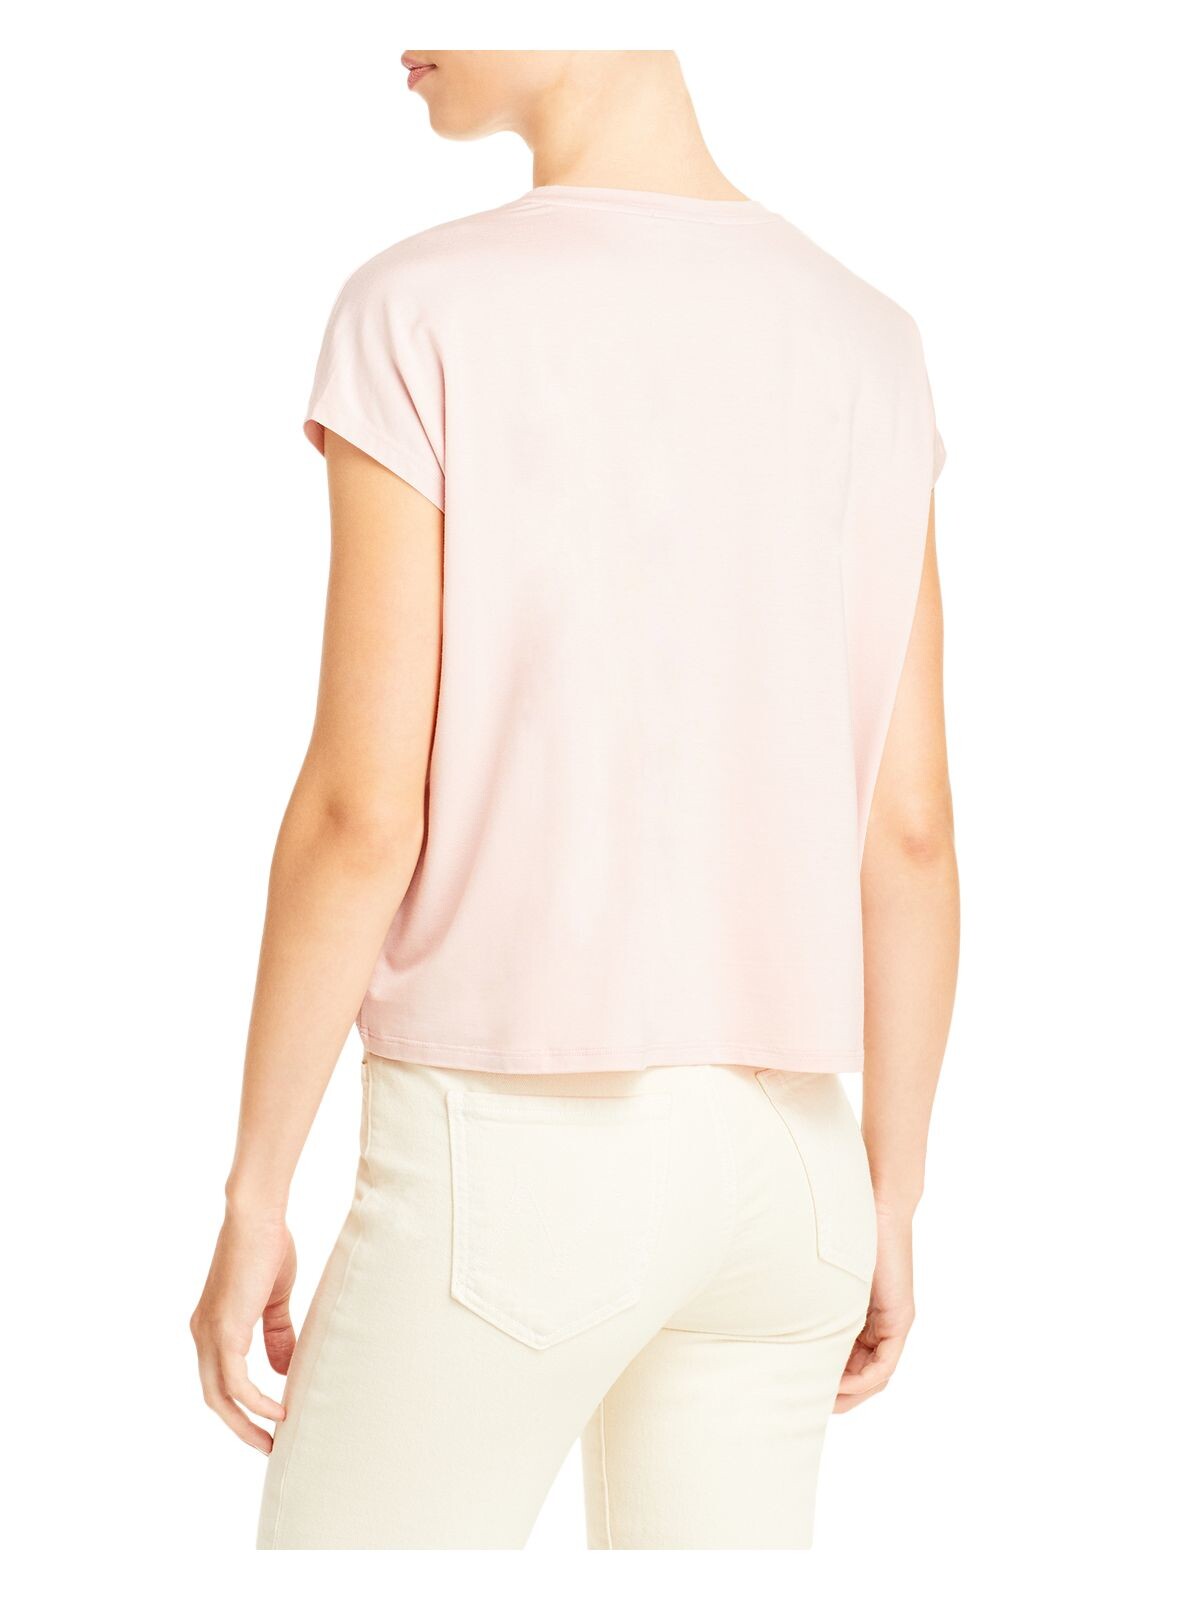 EILEEN FISHER Womens Pink Stretch Ruched Relaxed Fit Cap Sleeve Crew Neck T-Shirt L